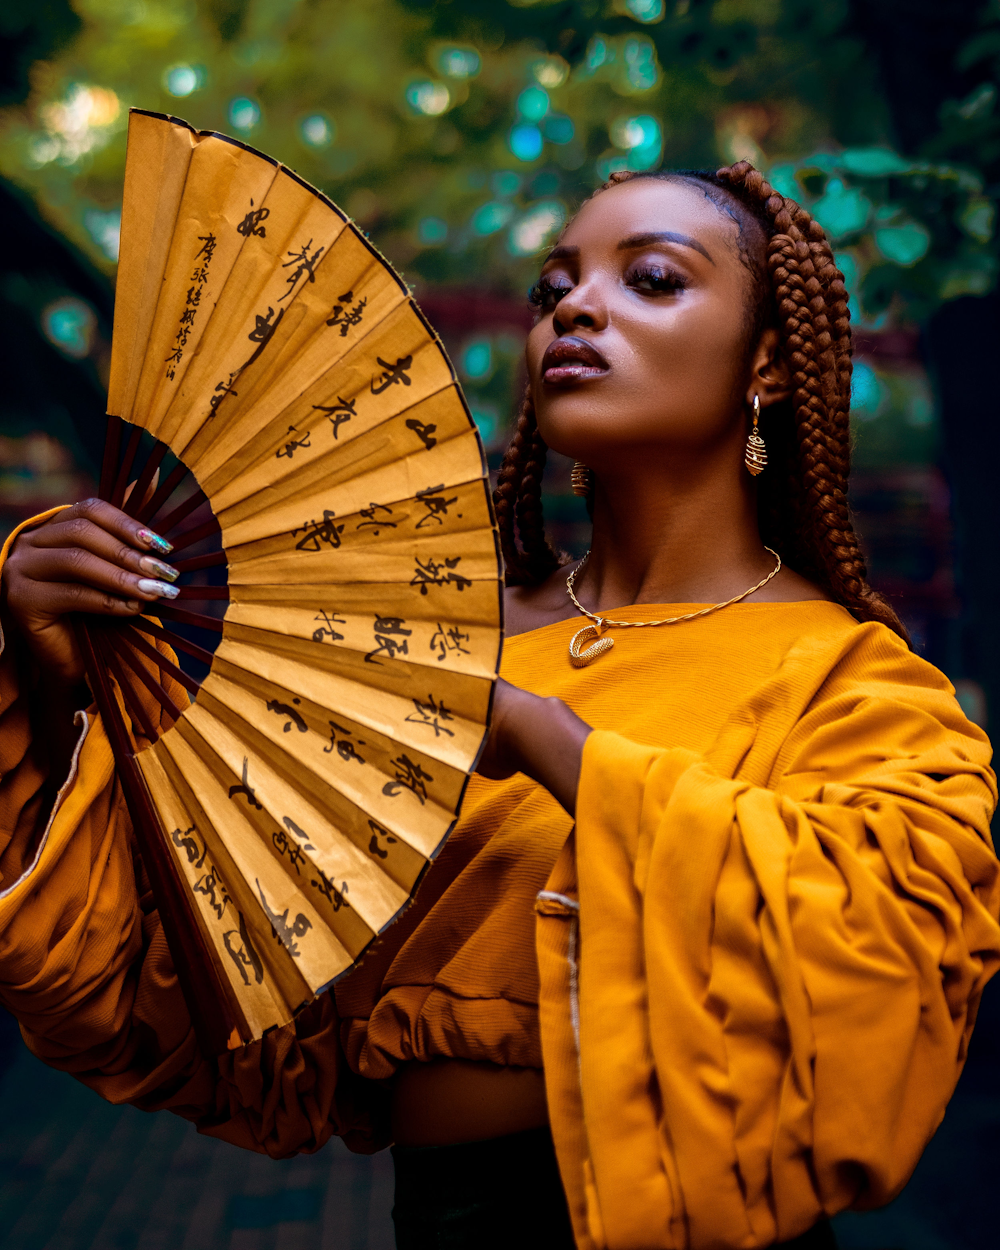 a woman with braids holding a yellow fan